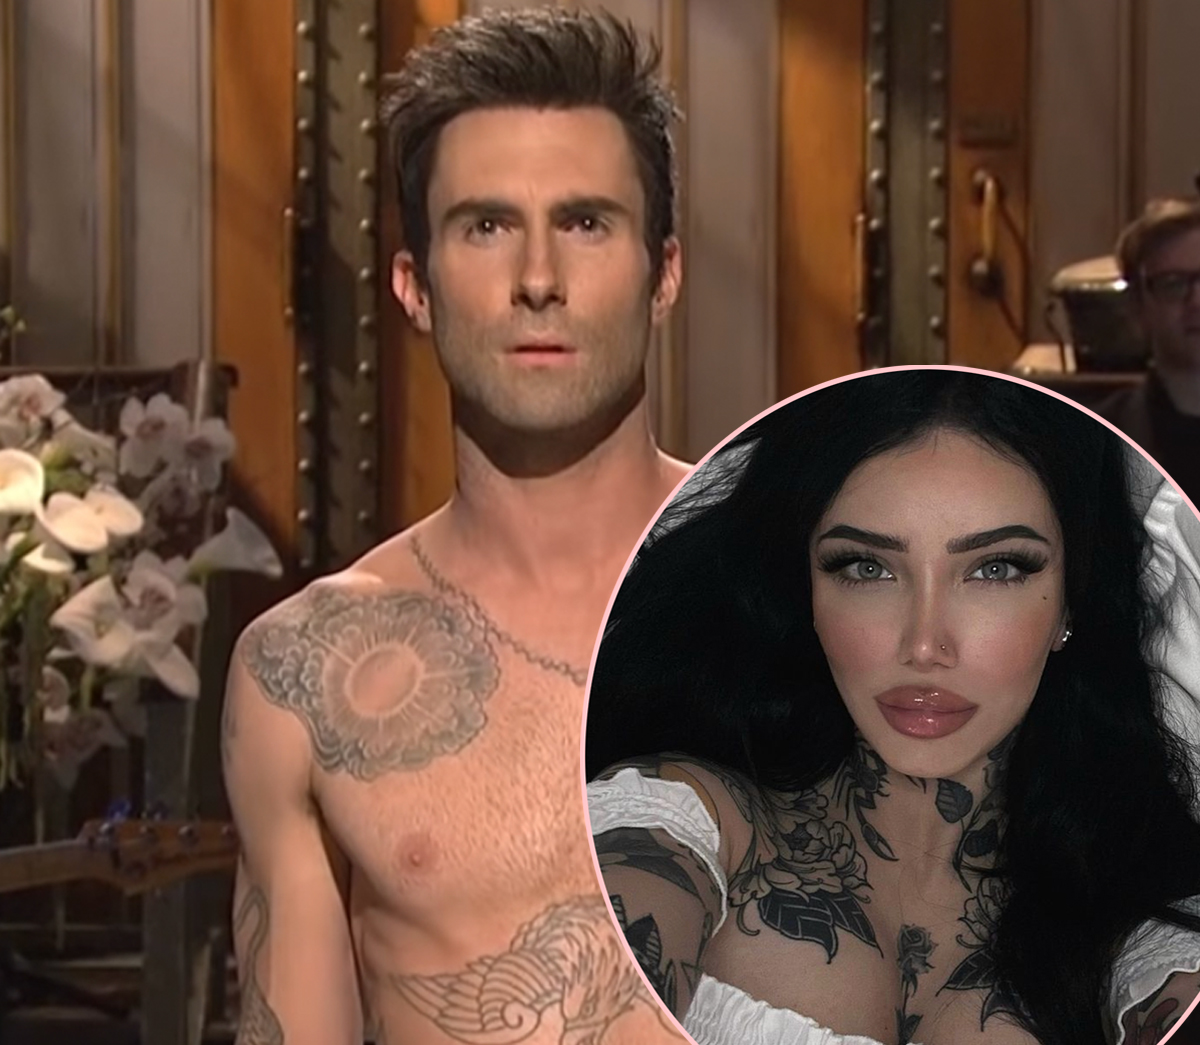 #Adam Levine Allegedly Sent IG Model Maryka ‘Naked Selfie’ While They Were ‘Sexting’!